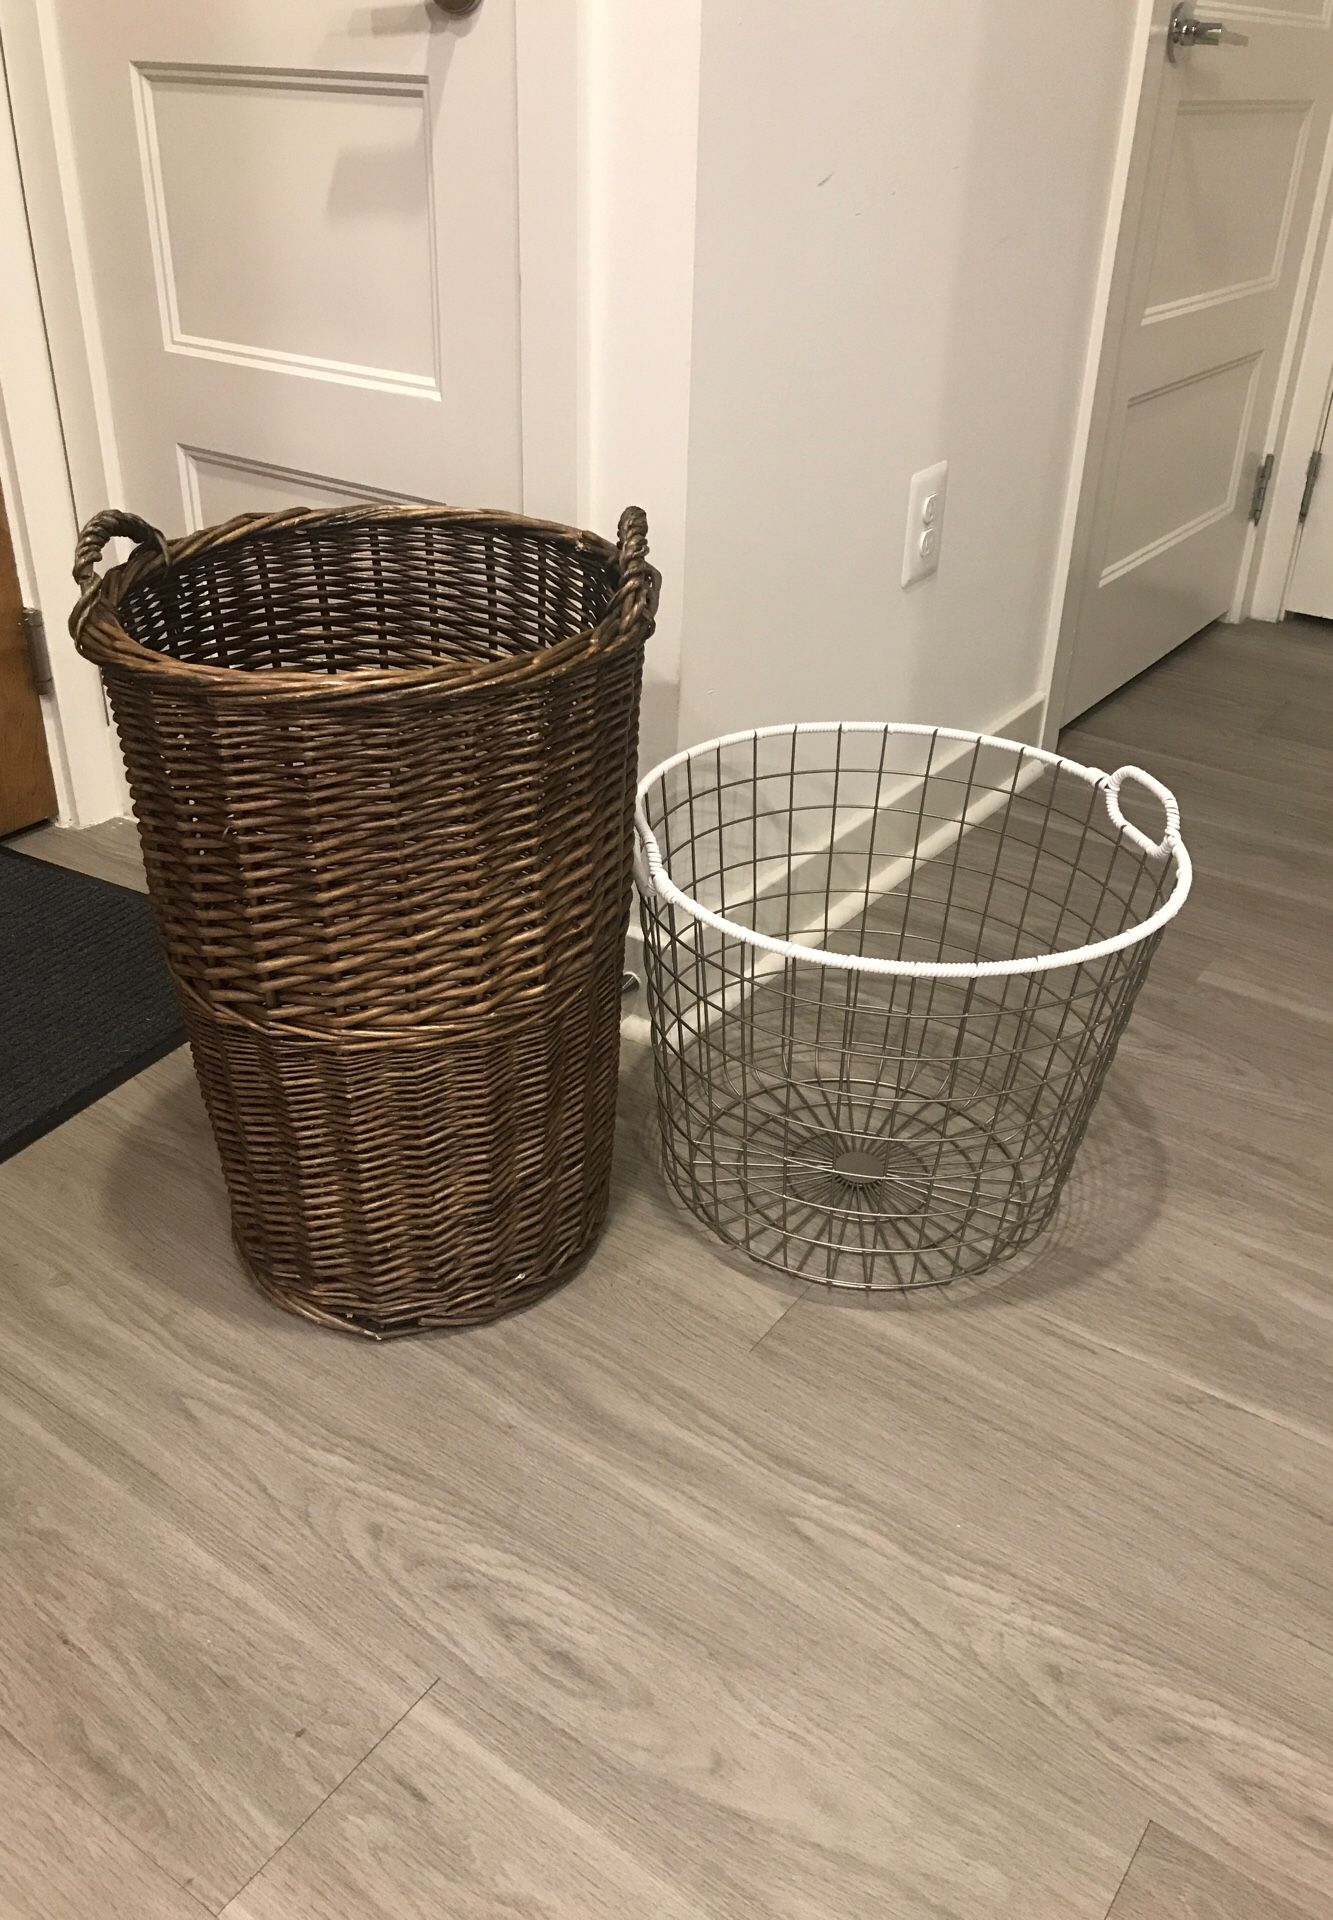 Two nice laundry or blanket baskets